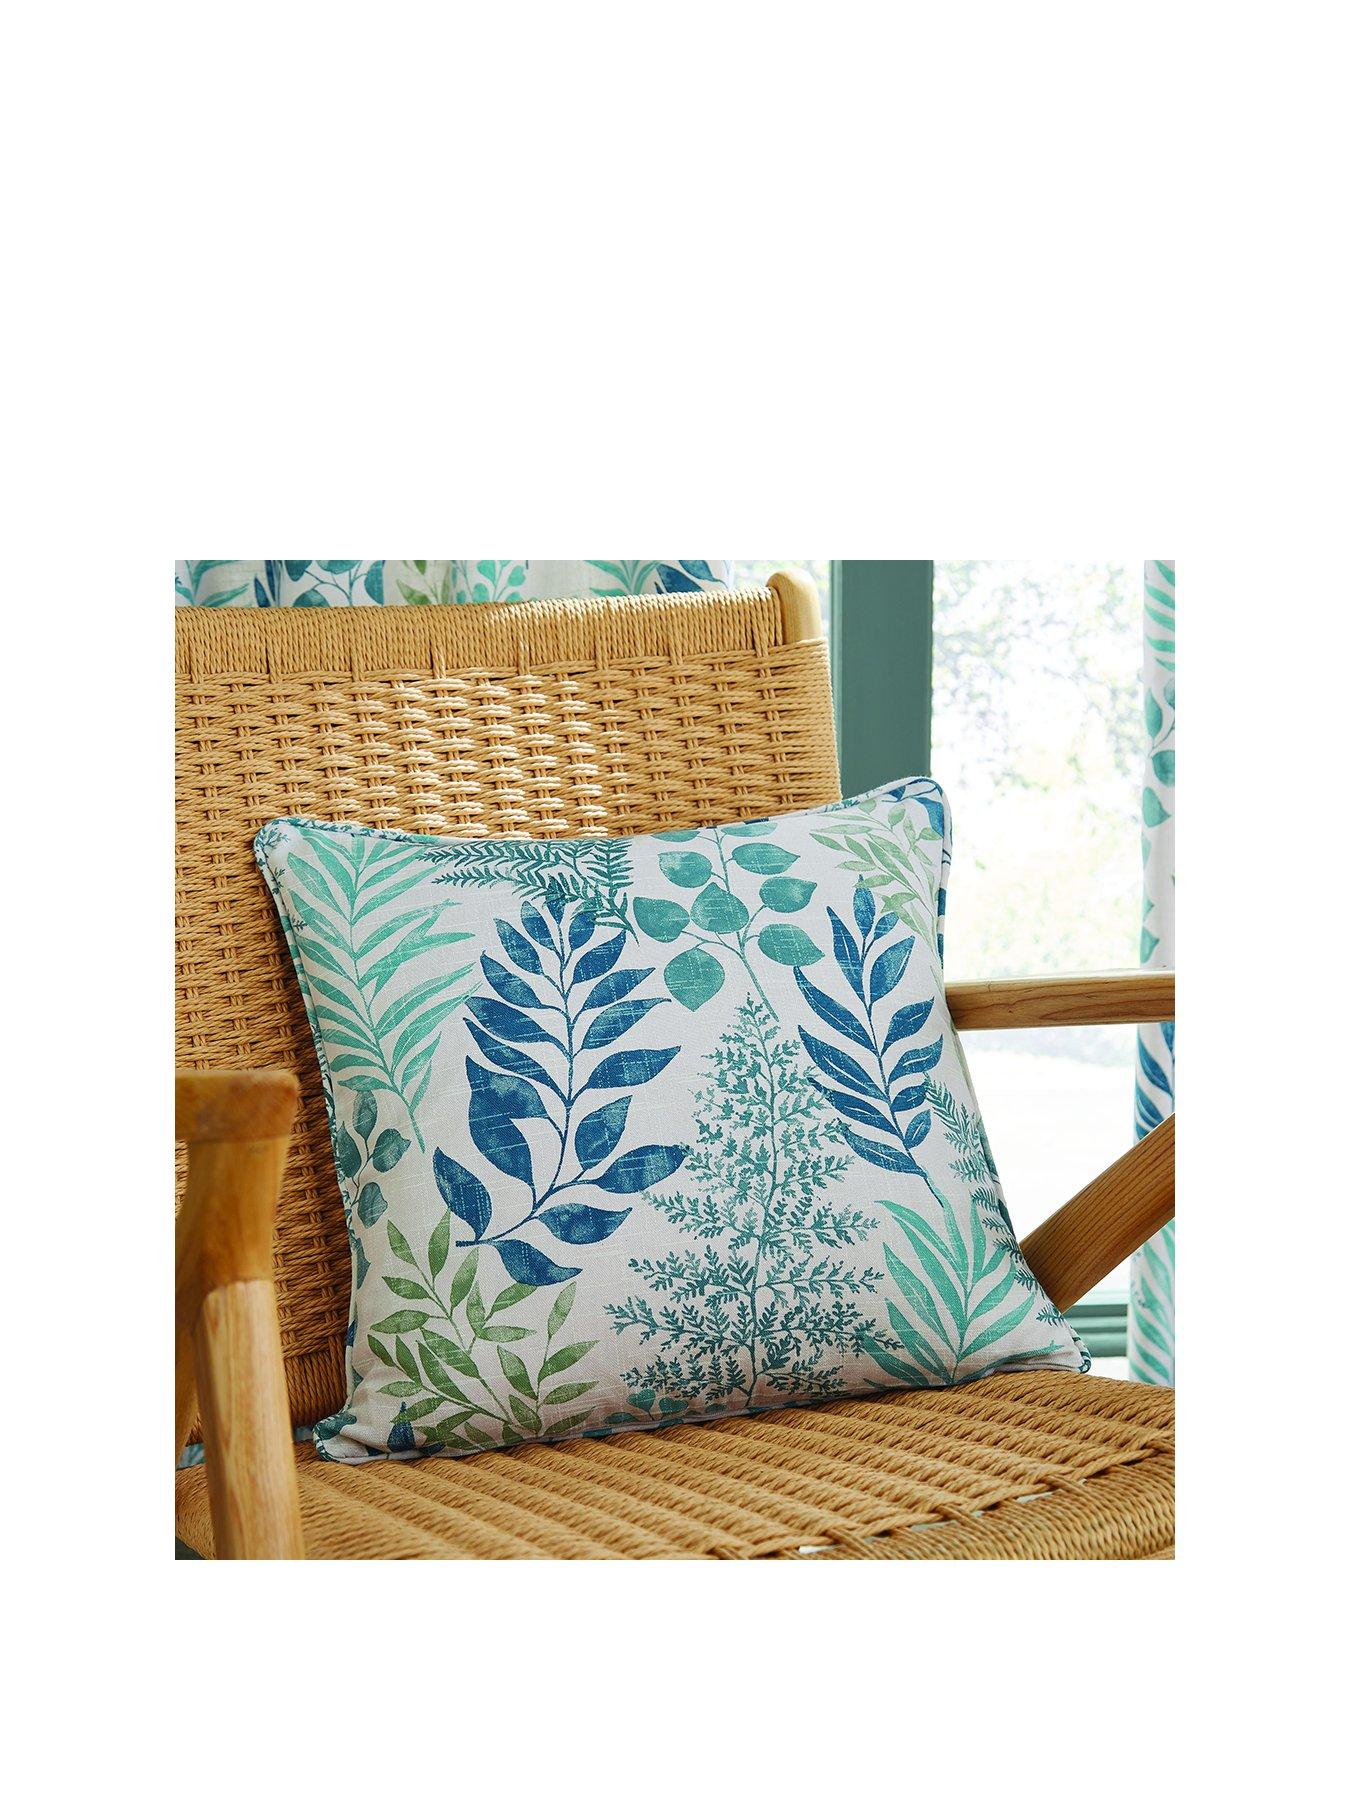 Cotswold Teal Woven Piped Edge Sofa Cushion Covers,17" x 17" 43cm 43cm 